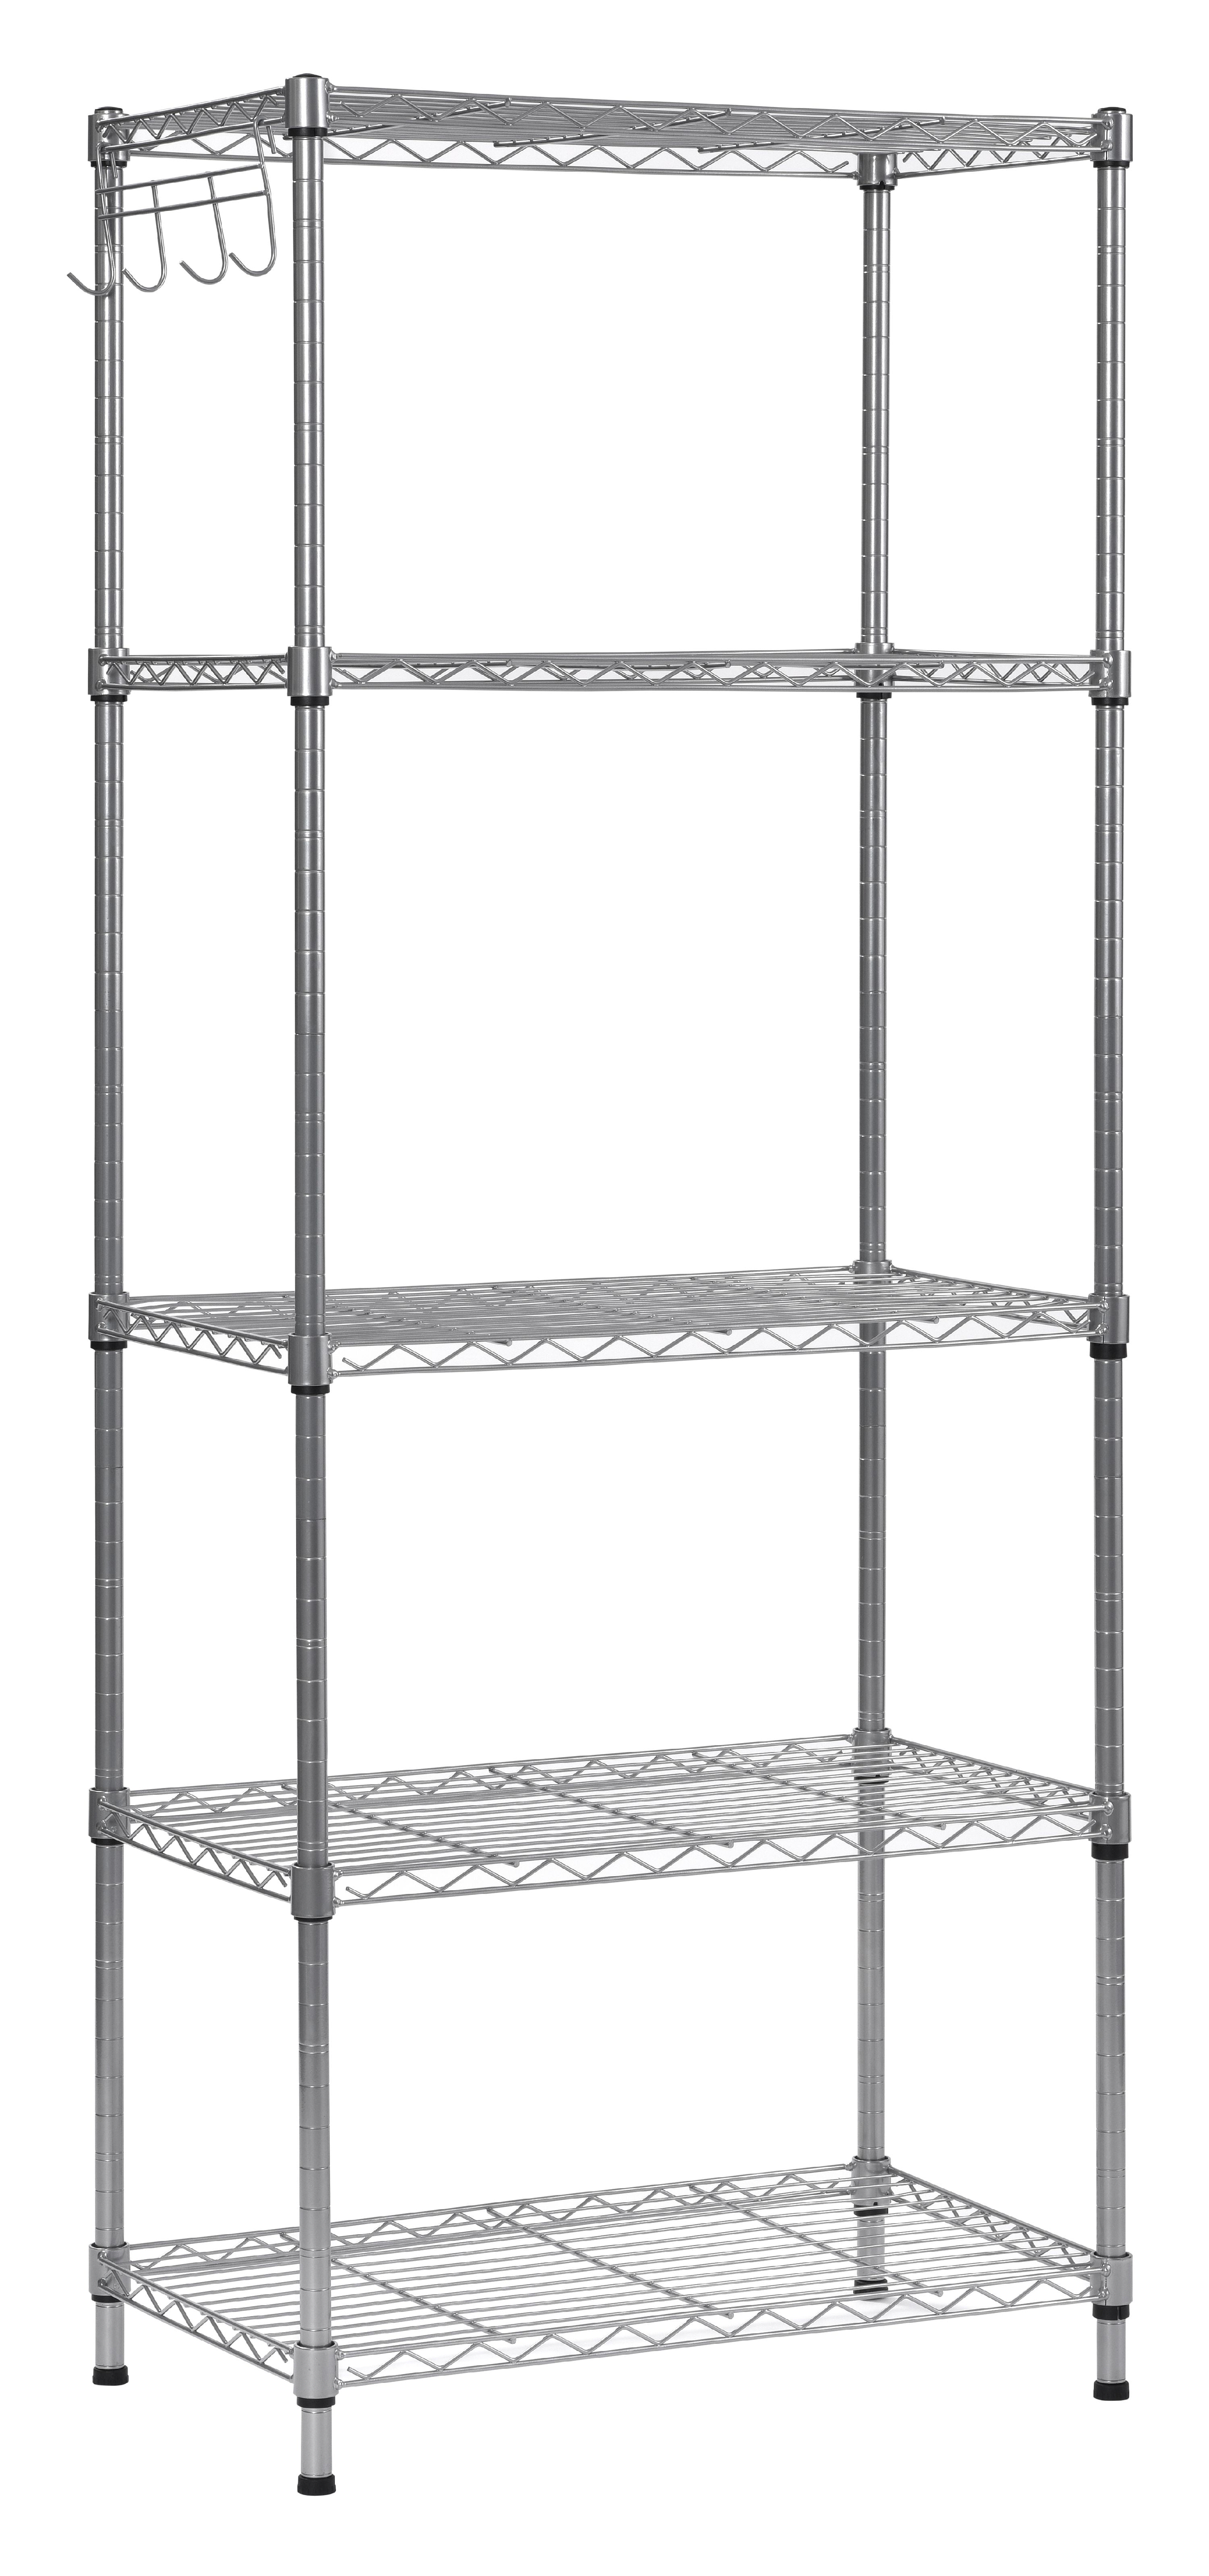 Muscle Rack 5 Tier Wire Shelving Unit, Adjustable 3 Tier Wide Wire Shelving